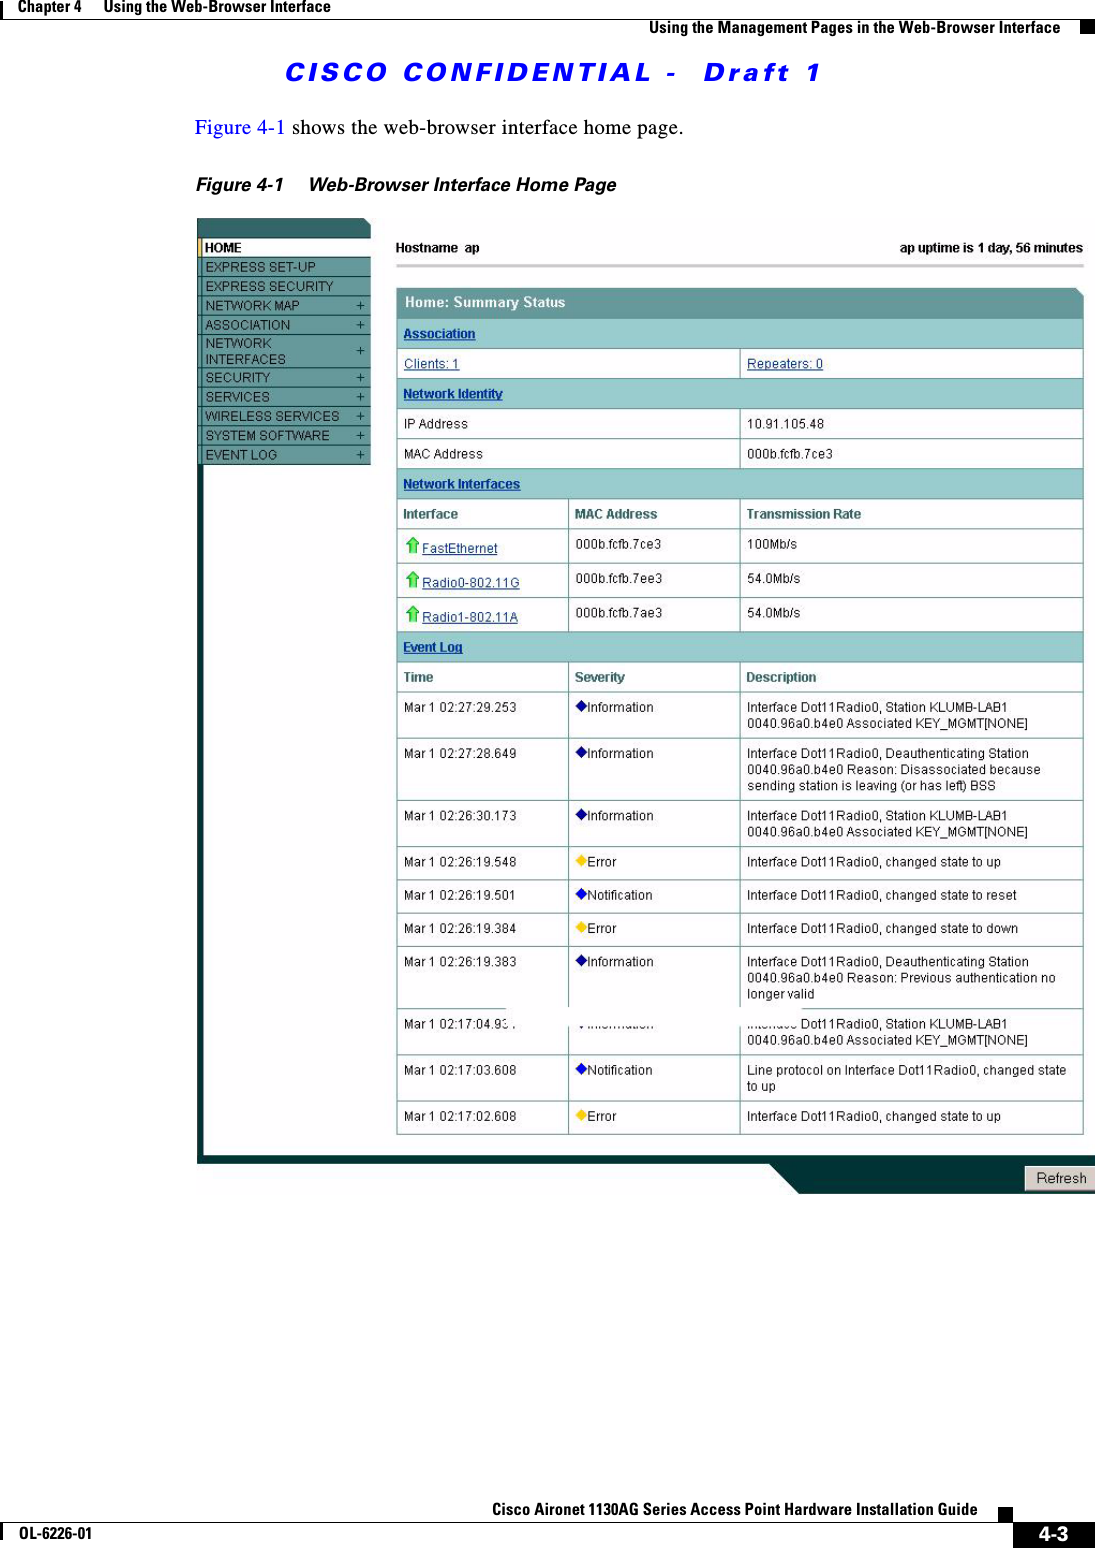  CISCO CONFIDENTIAL -  Draft 14-3Cisco Aironet 1130AG Series Access Point Hardware Installation GuideOL-6226-01Chapter 4      Using the Web-Browser InterfaceUsing the Management Pages in the Web-Browser InterfaceFigure 4-1 shows the web-browser interface home page.Figure 4-1 Web-Browser Interface Home Page 